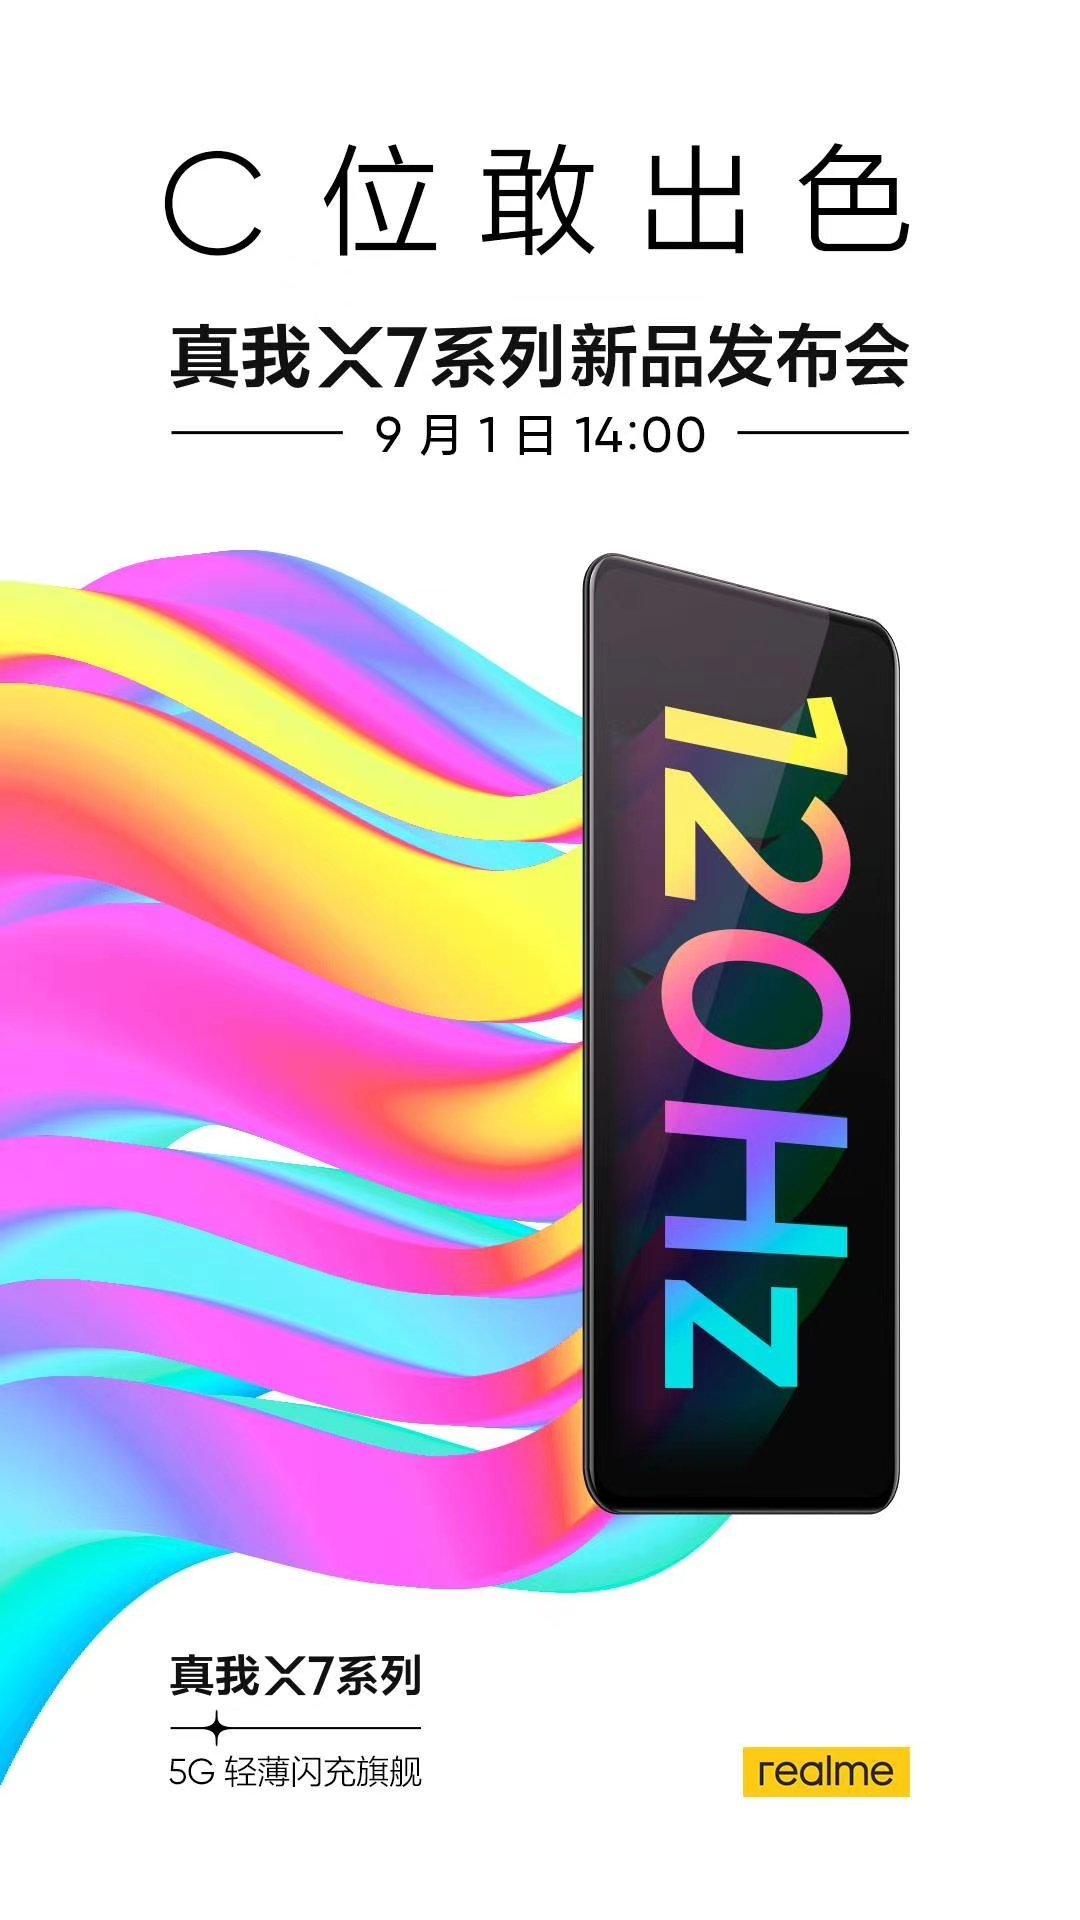 Realme X7 series confirmed to launched on September 1st